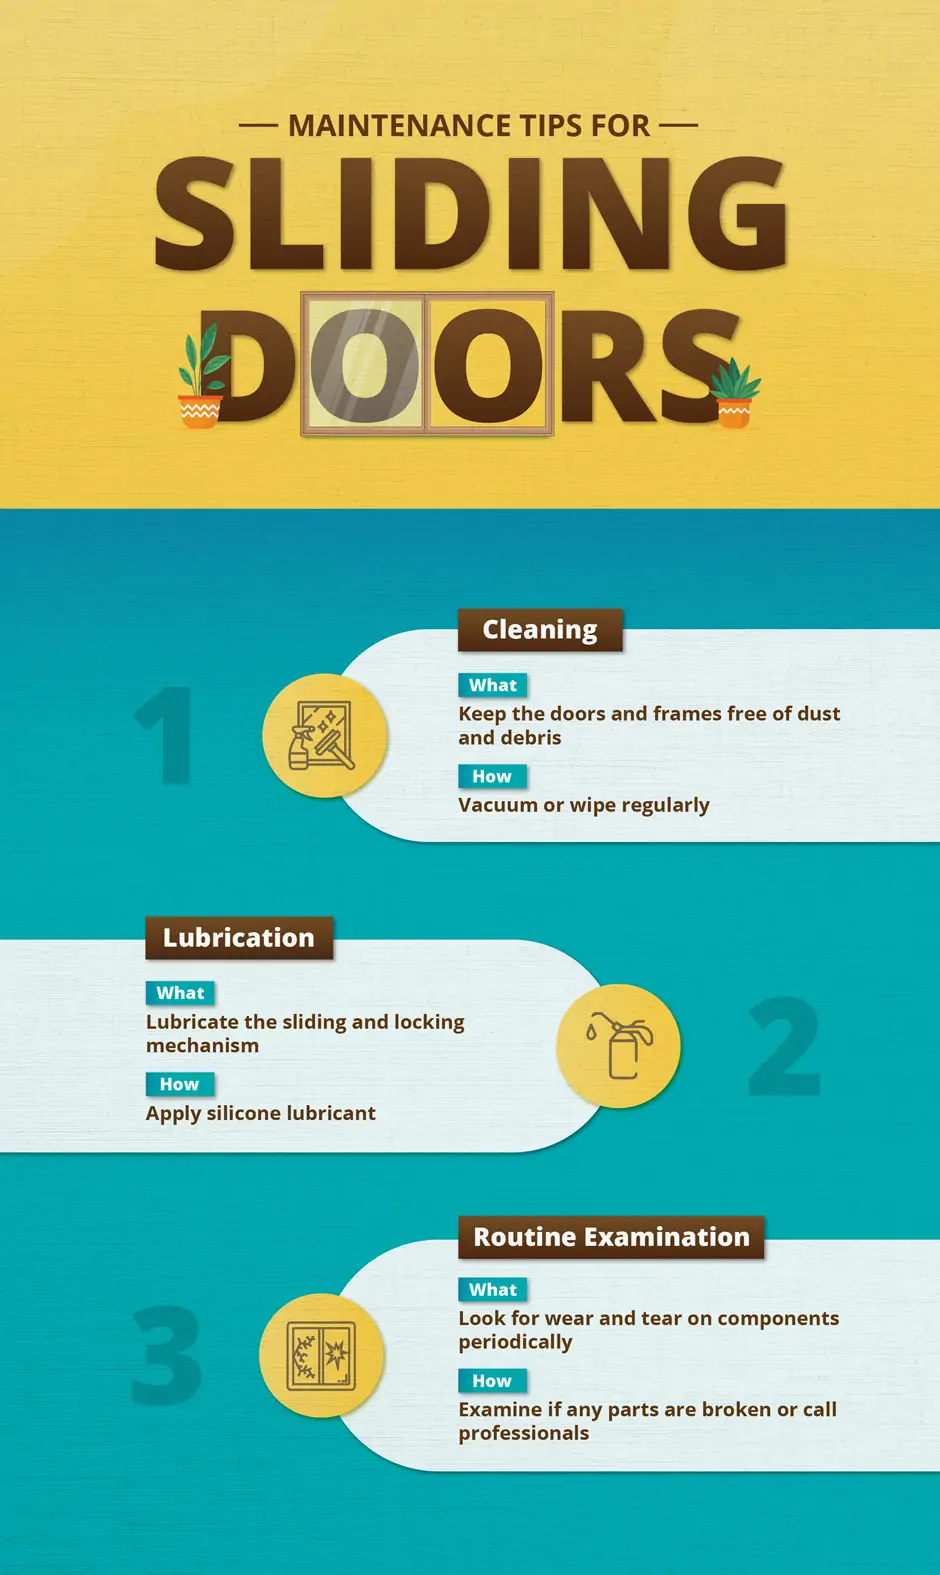 Maintenance tips for sliding doors: cleaning, lubrication and routine examination